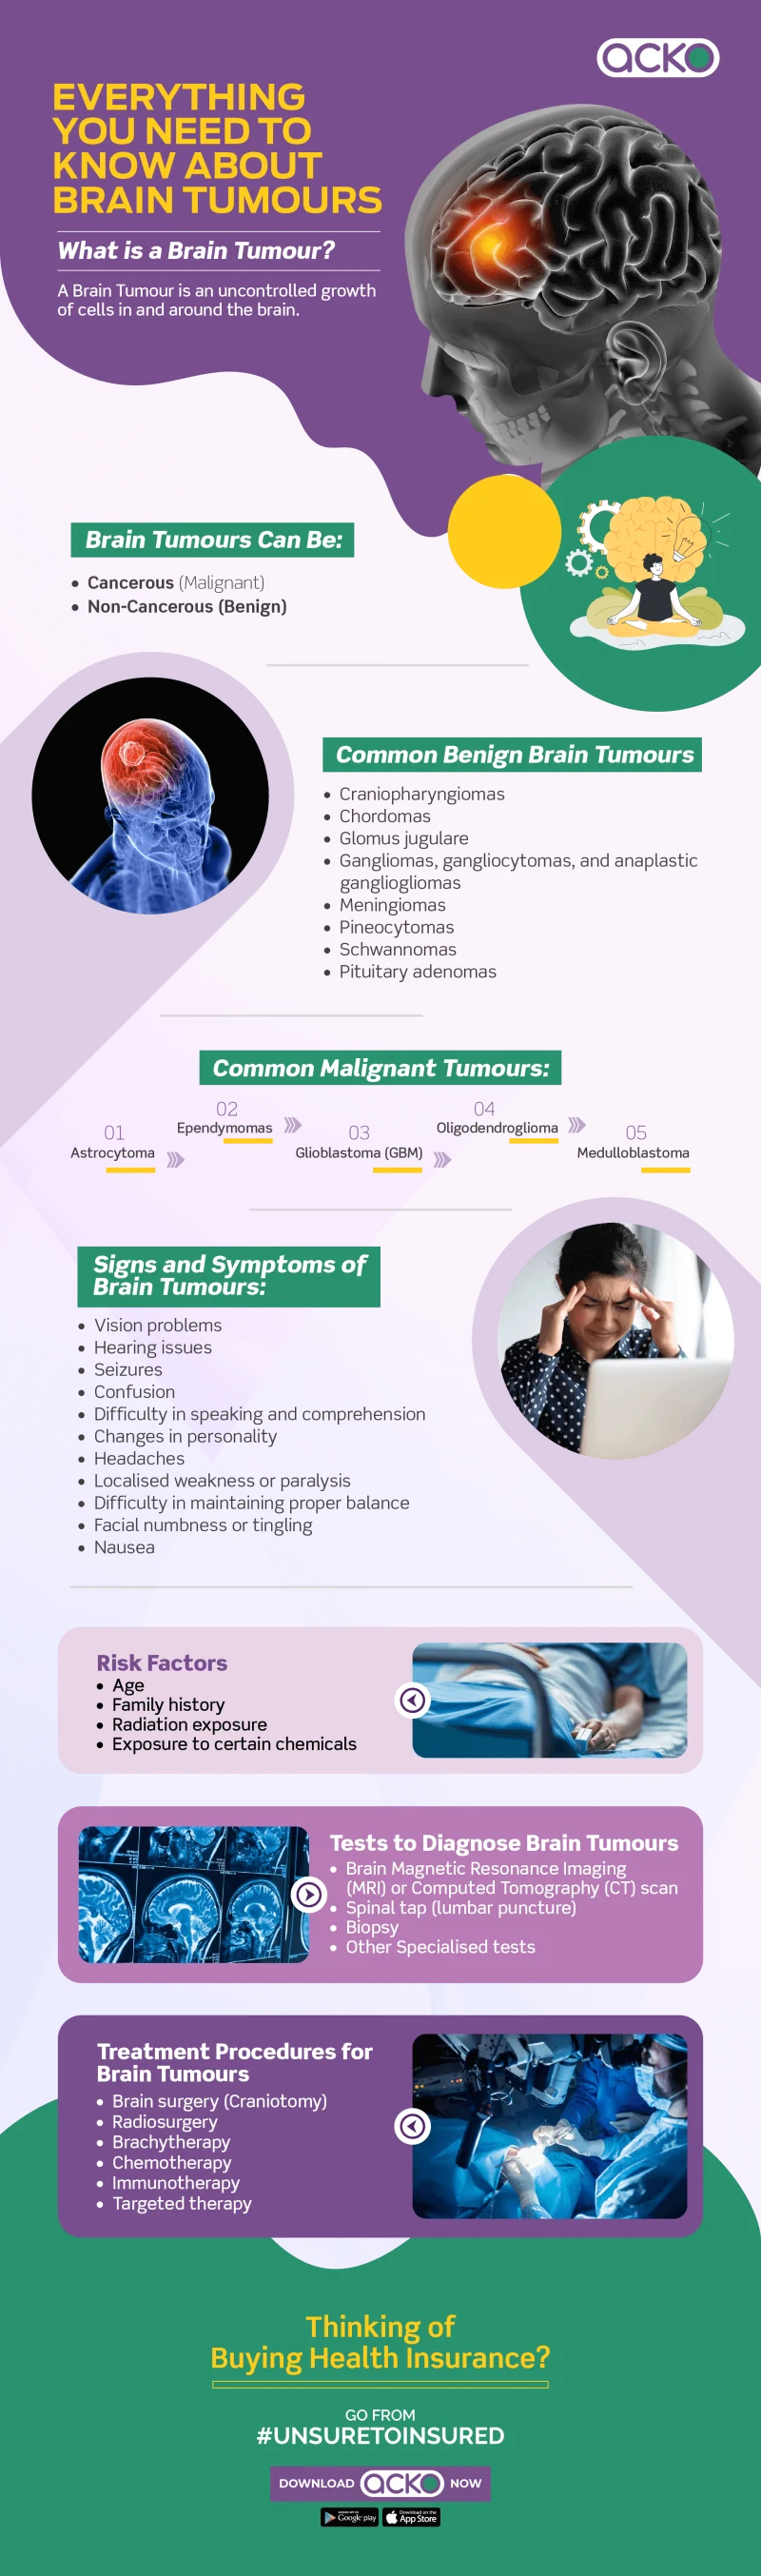 Signs and symptoms of Brain Tumors